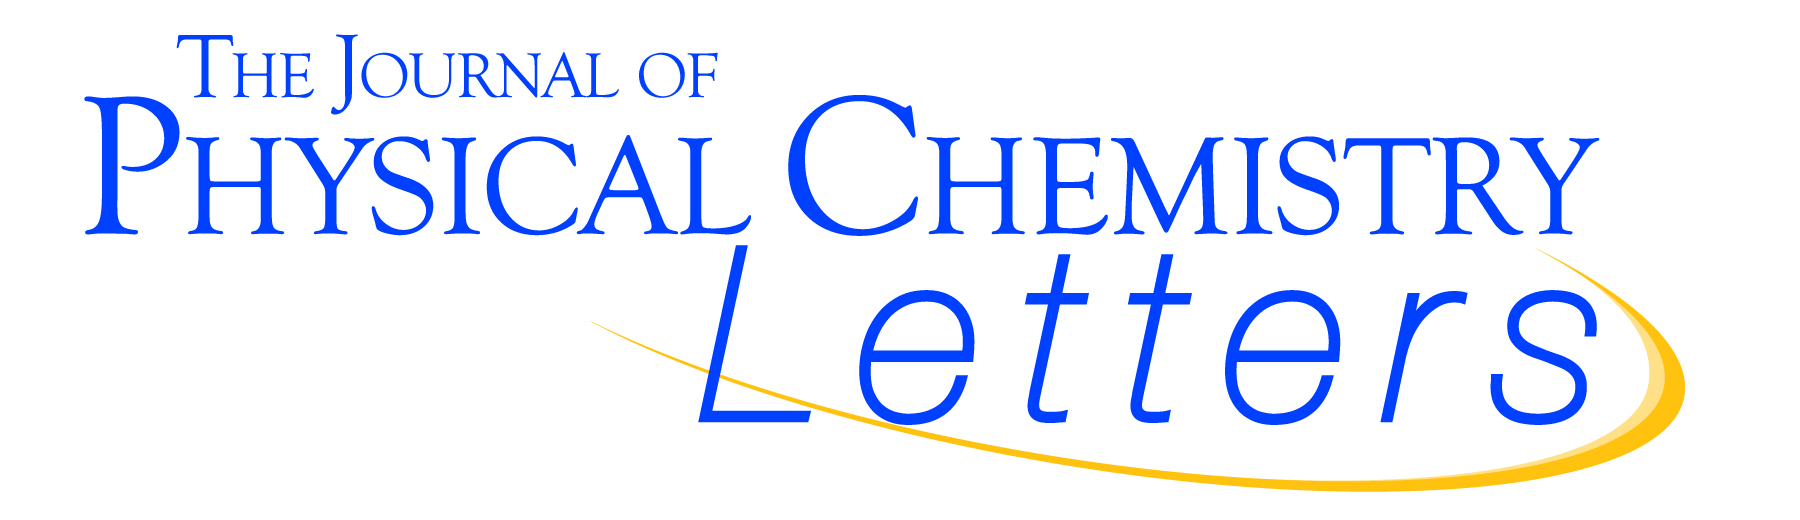 The Journal of physical Chemistry c. American Chemical Society publications. ACS publications. Journal of the Turkish Chemical Society.